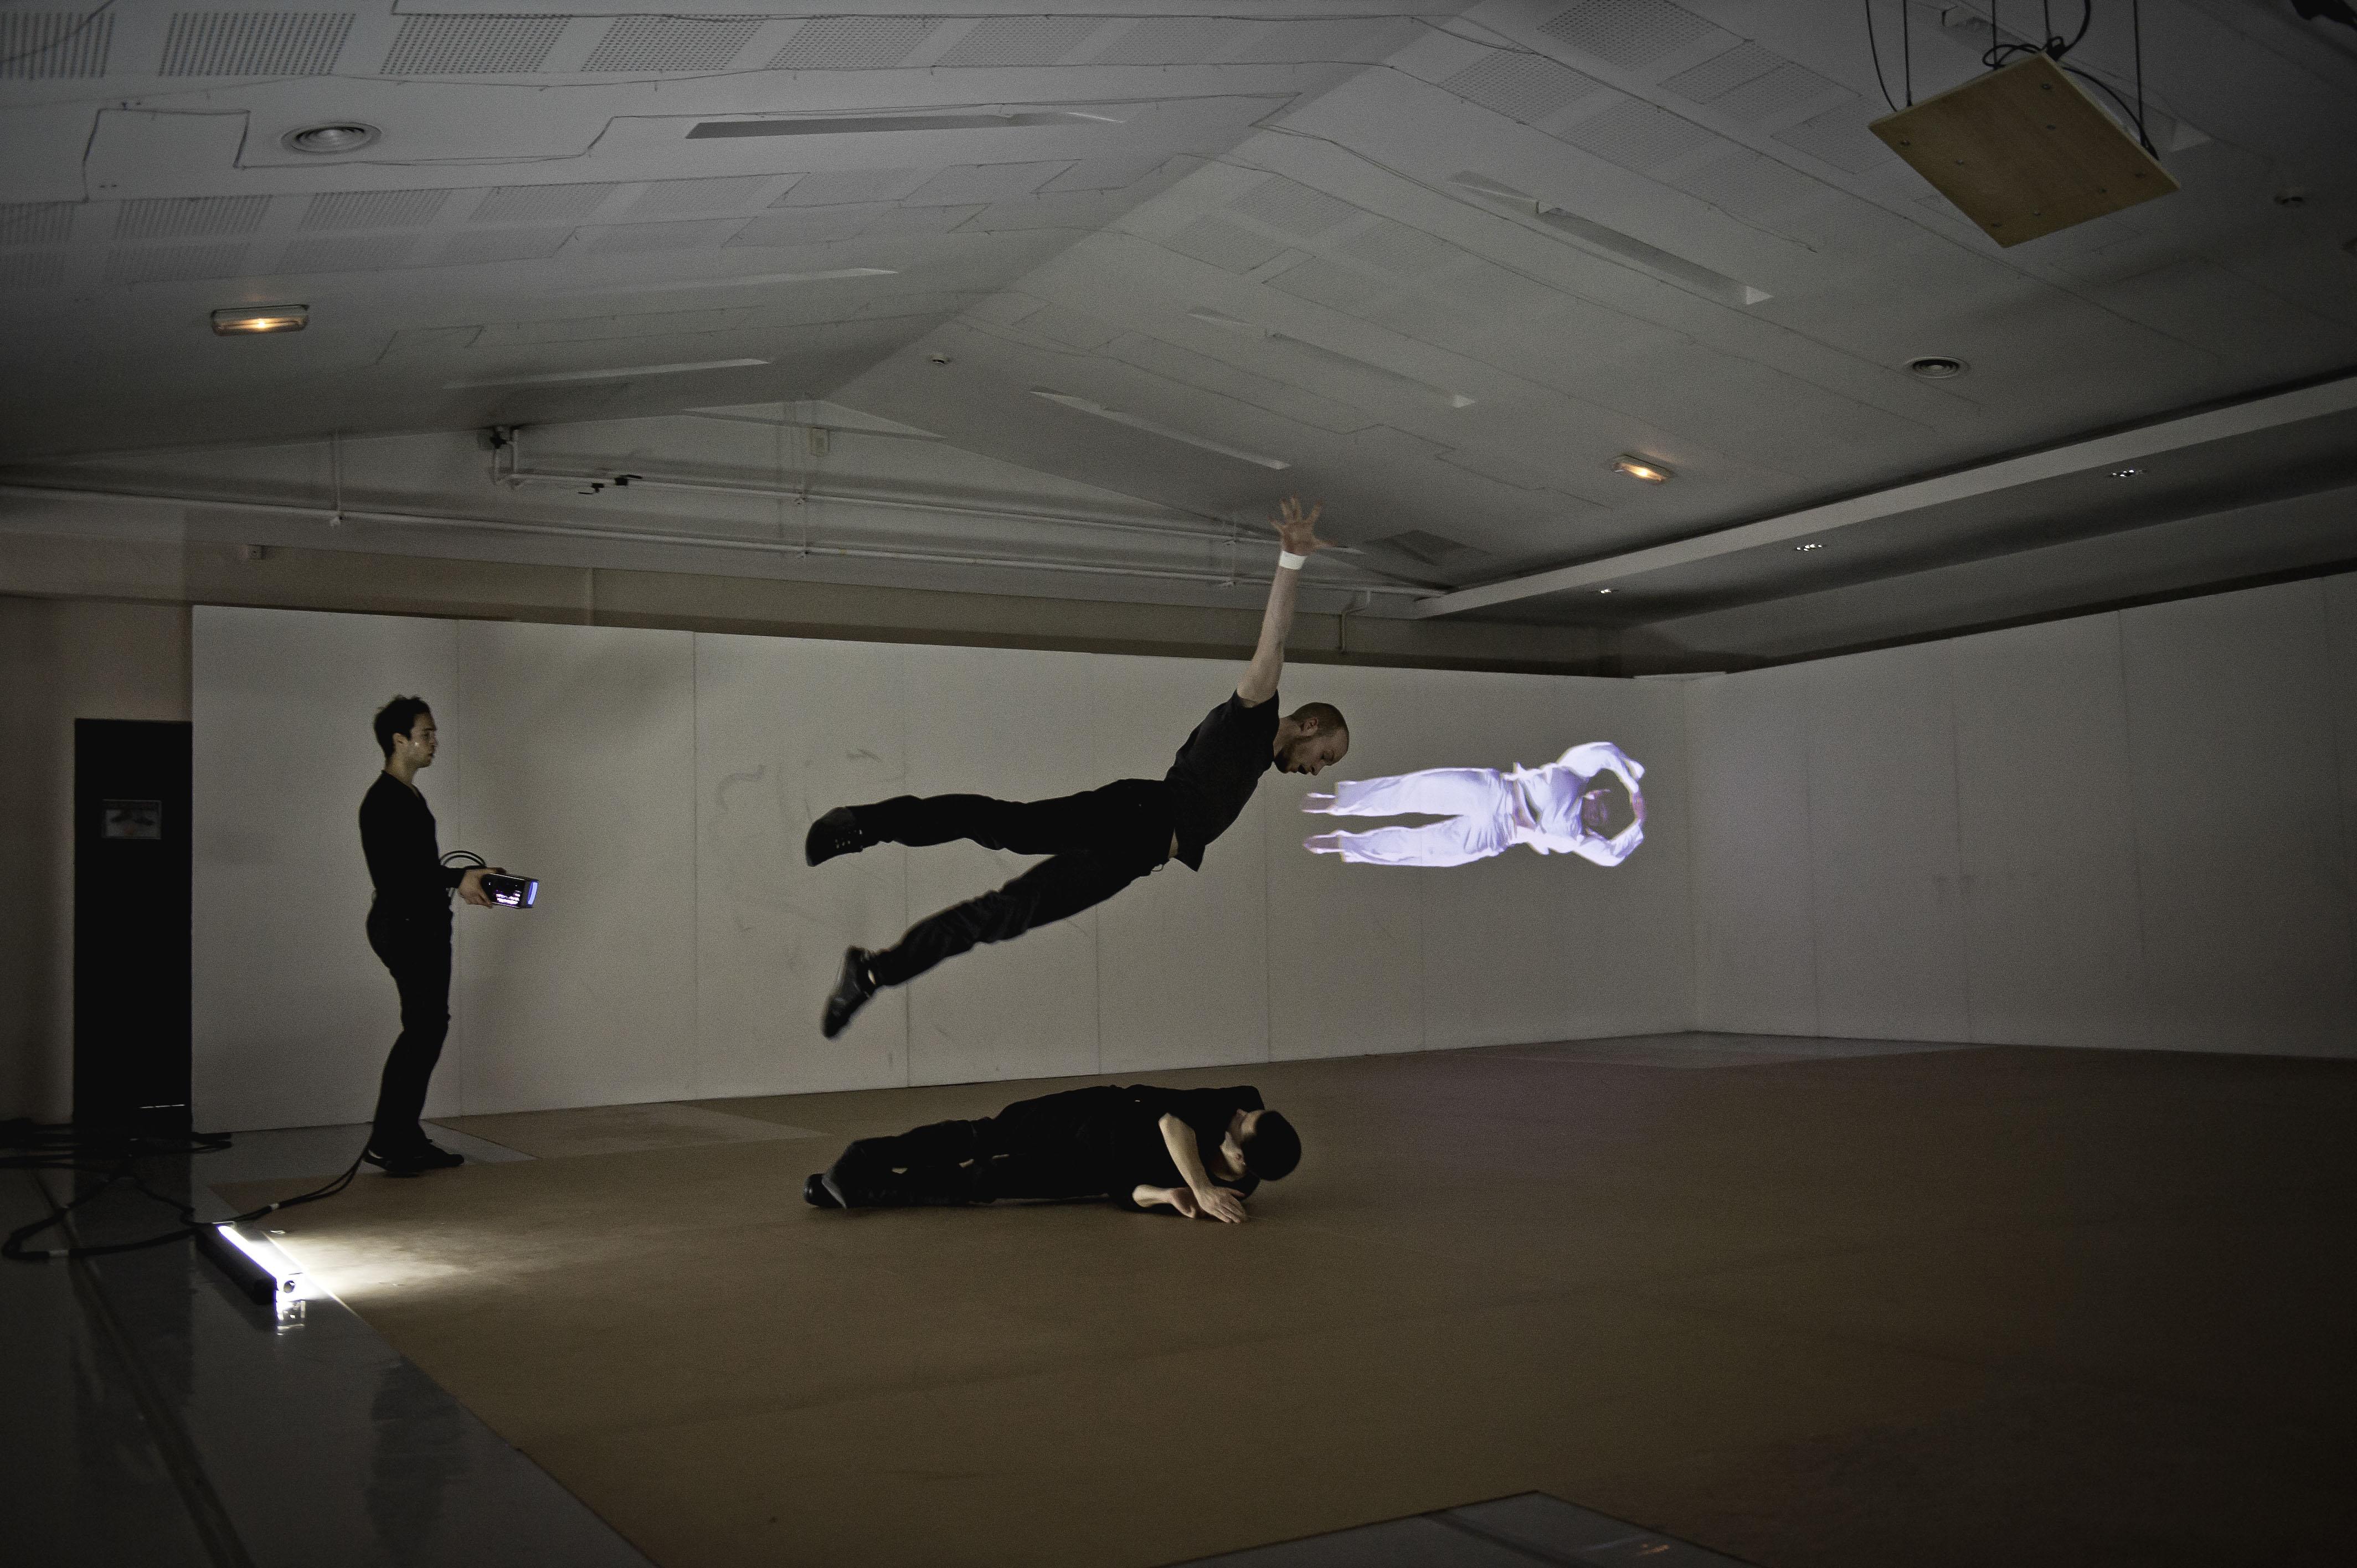 A man is in mid-air, limbs spread, above another figure curled on the floor. A third person holds a projector that casts an image of a person wearing white on the wall.